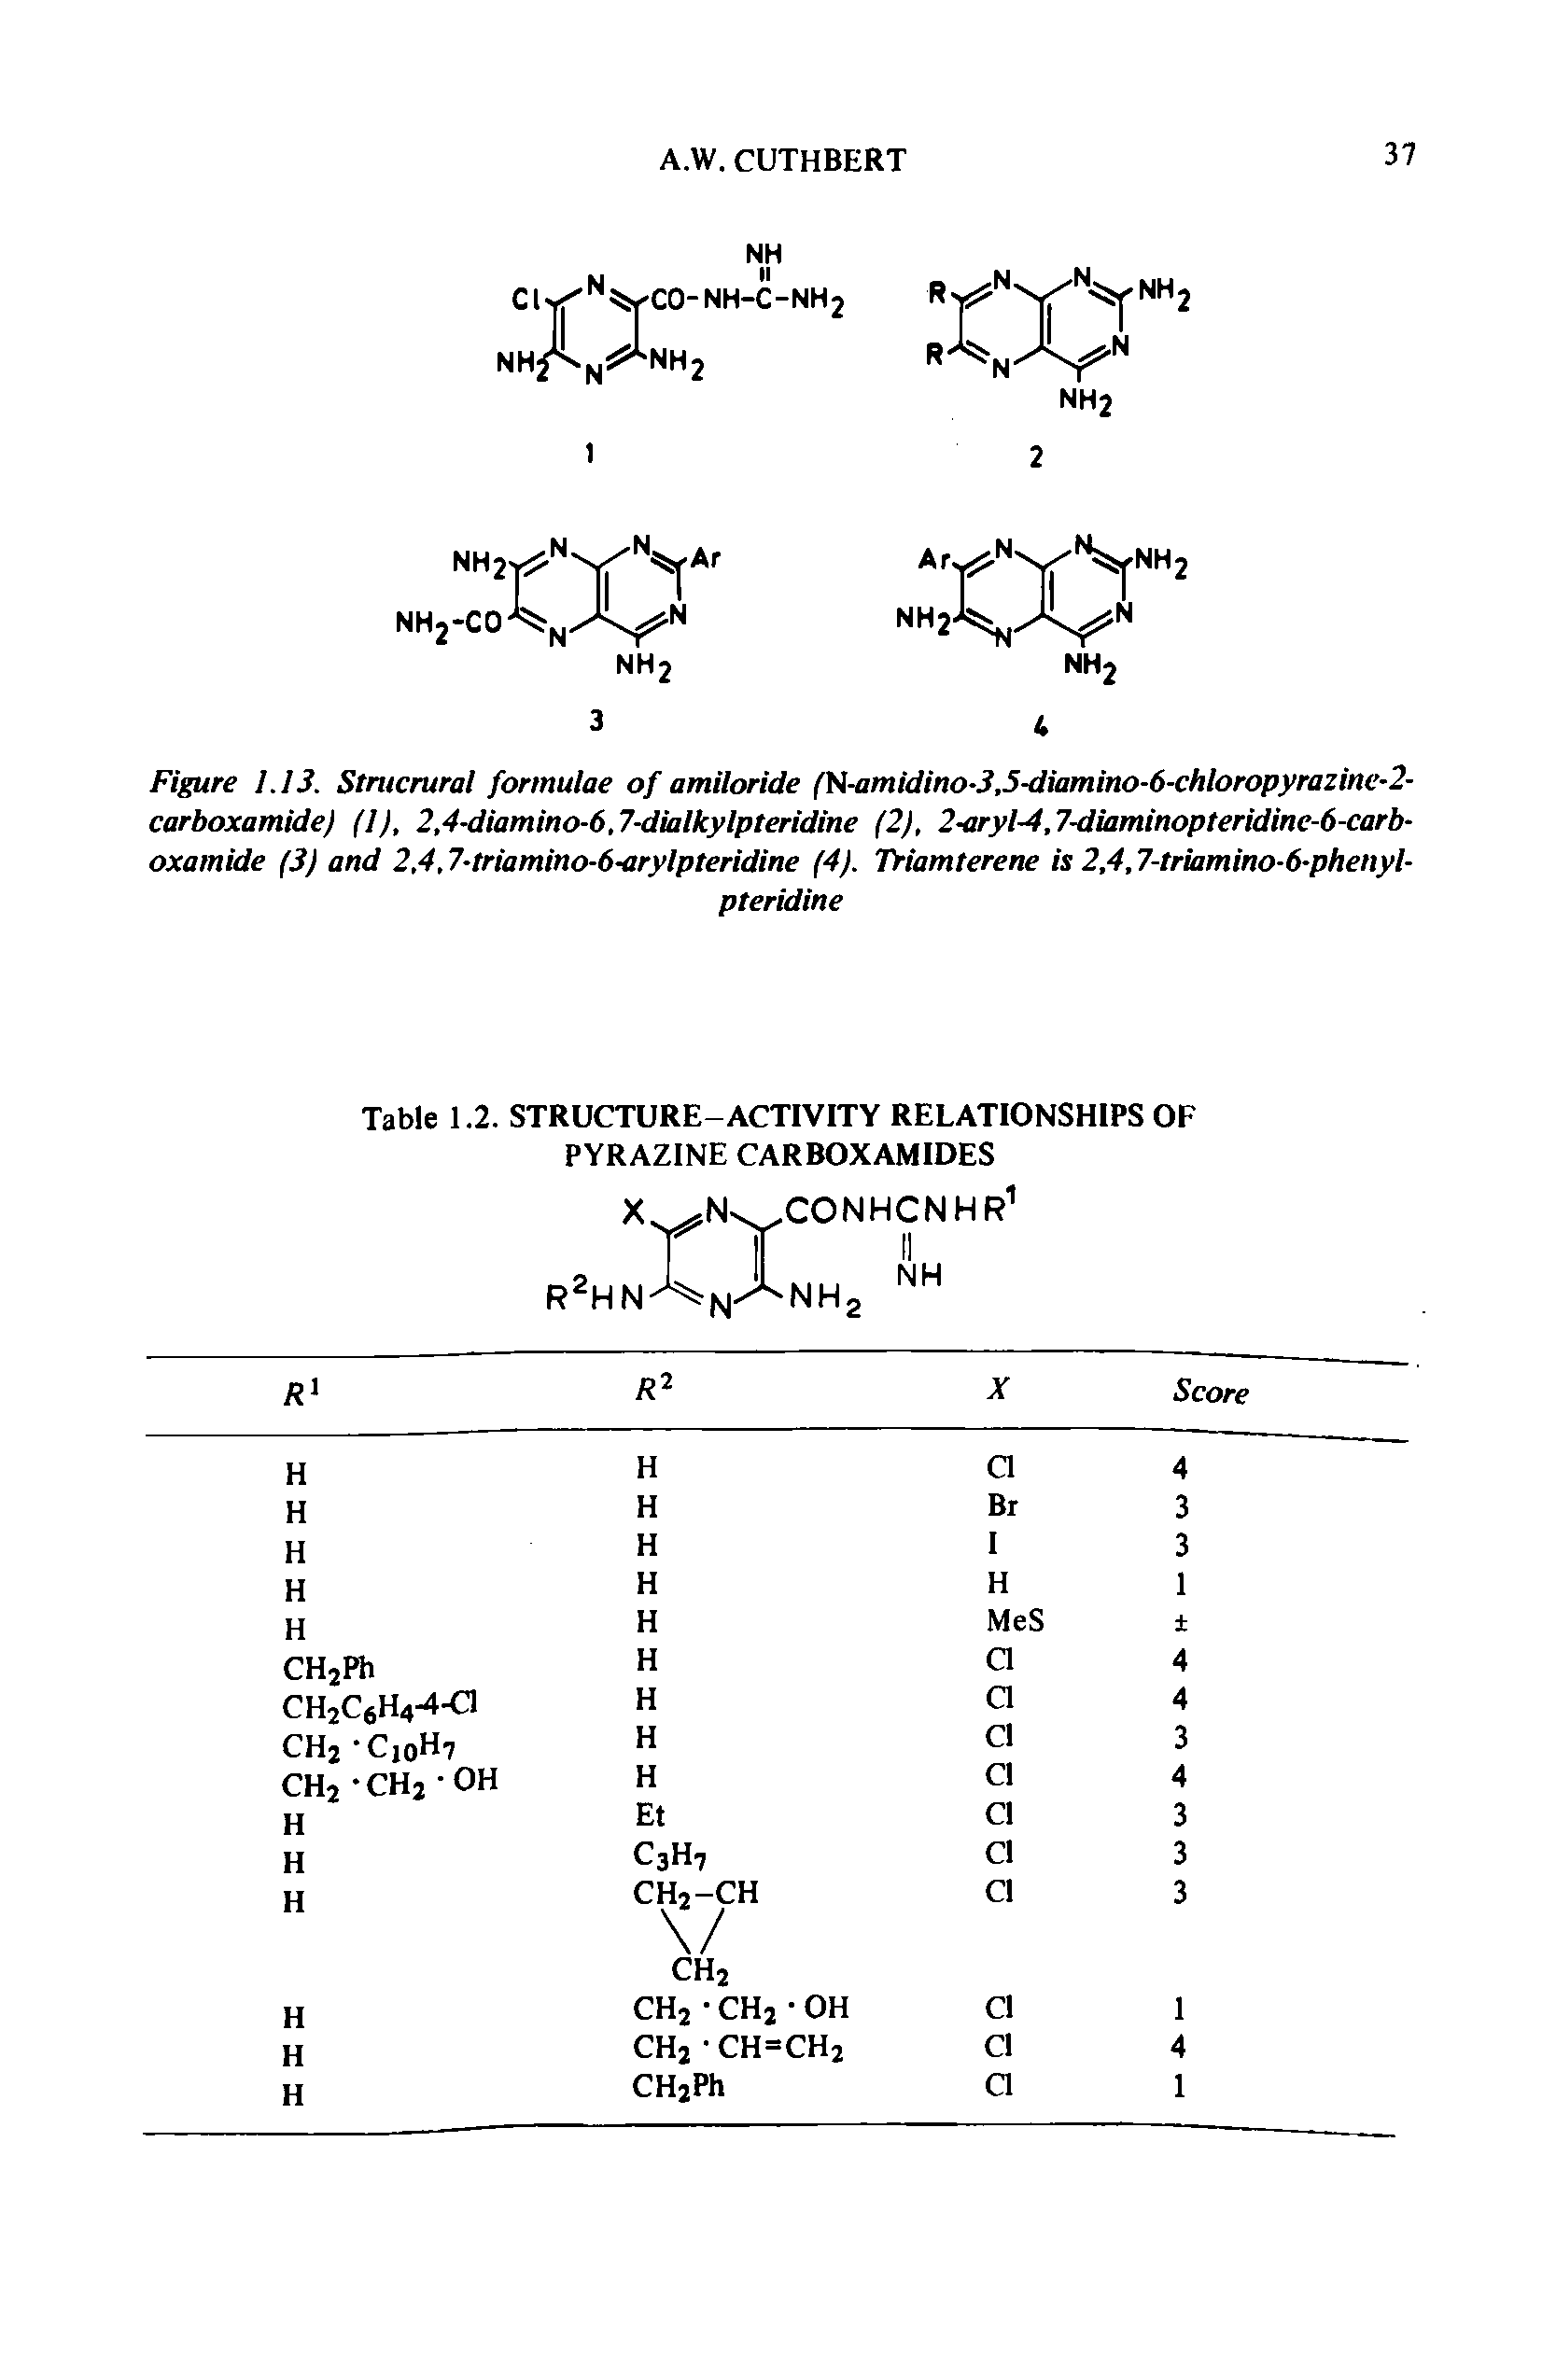 Table 1.2. STRUCTURE-ACTIVITY RELATIONSHIPS OF PYRAZINE CARBOXAMIDES...